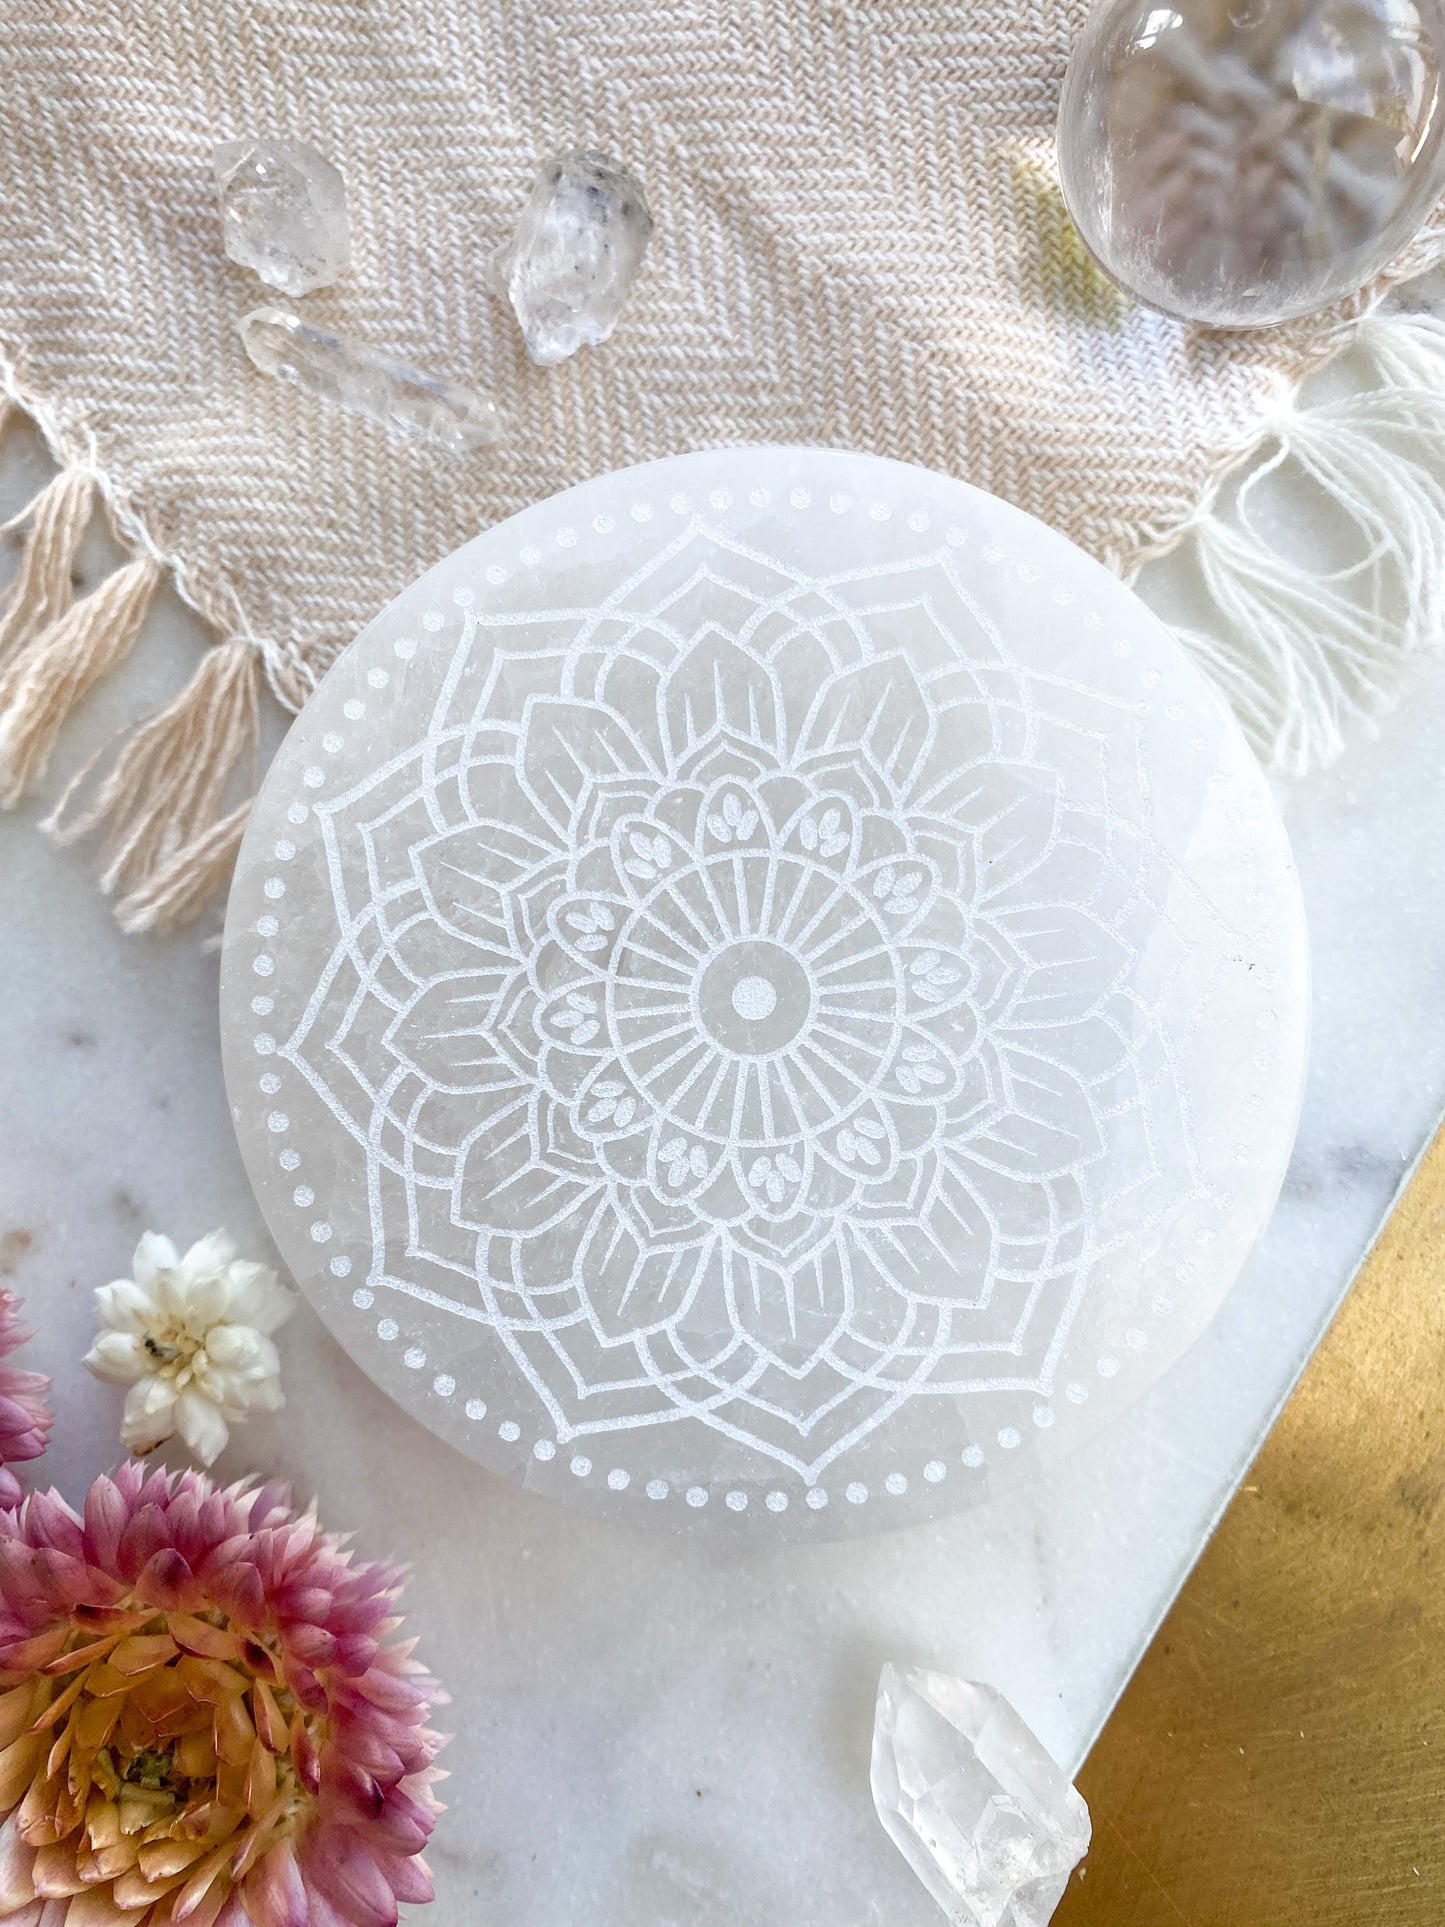 *FREE with $200 Purchase* 4" Selenite Crystal Grid Charging and Cleansing Disc Plate - Fractalista Designs